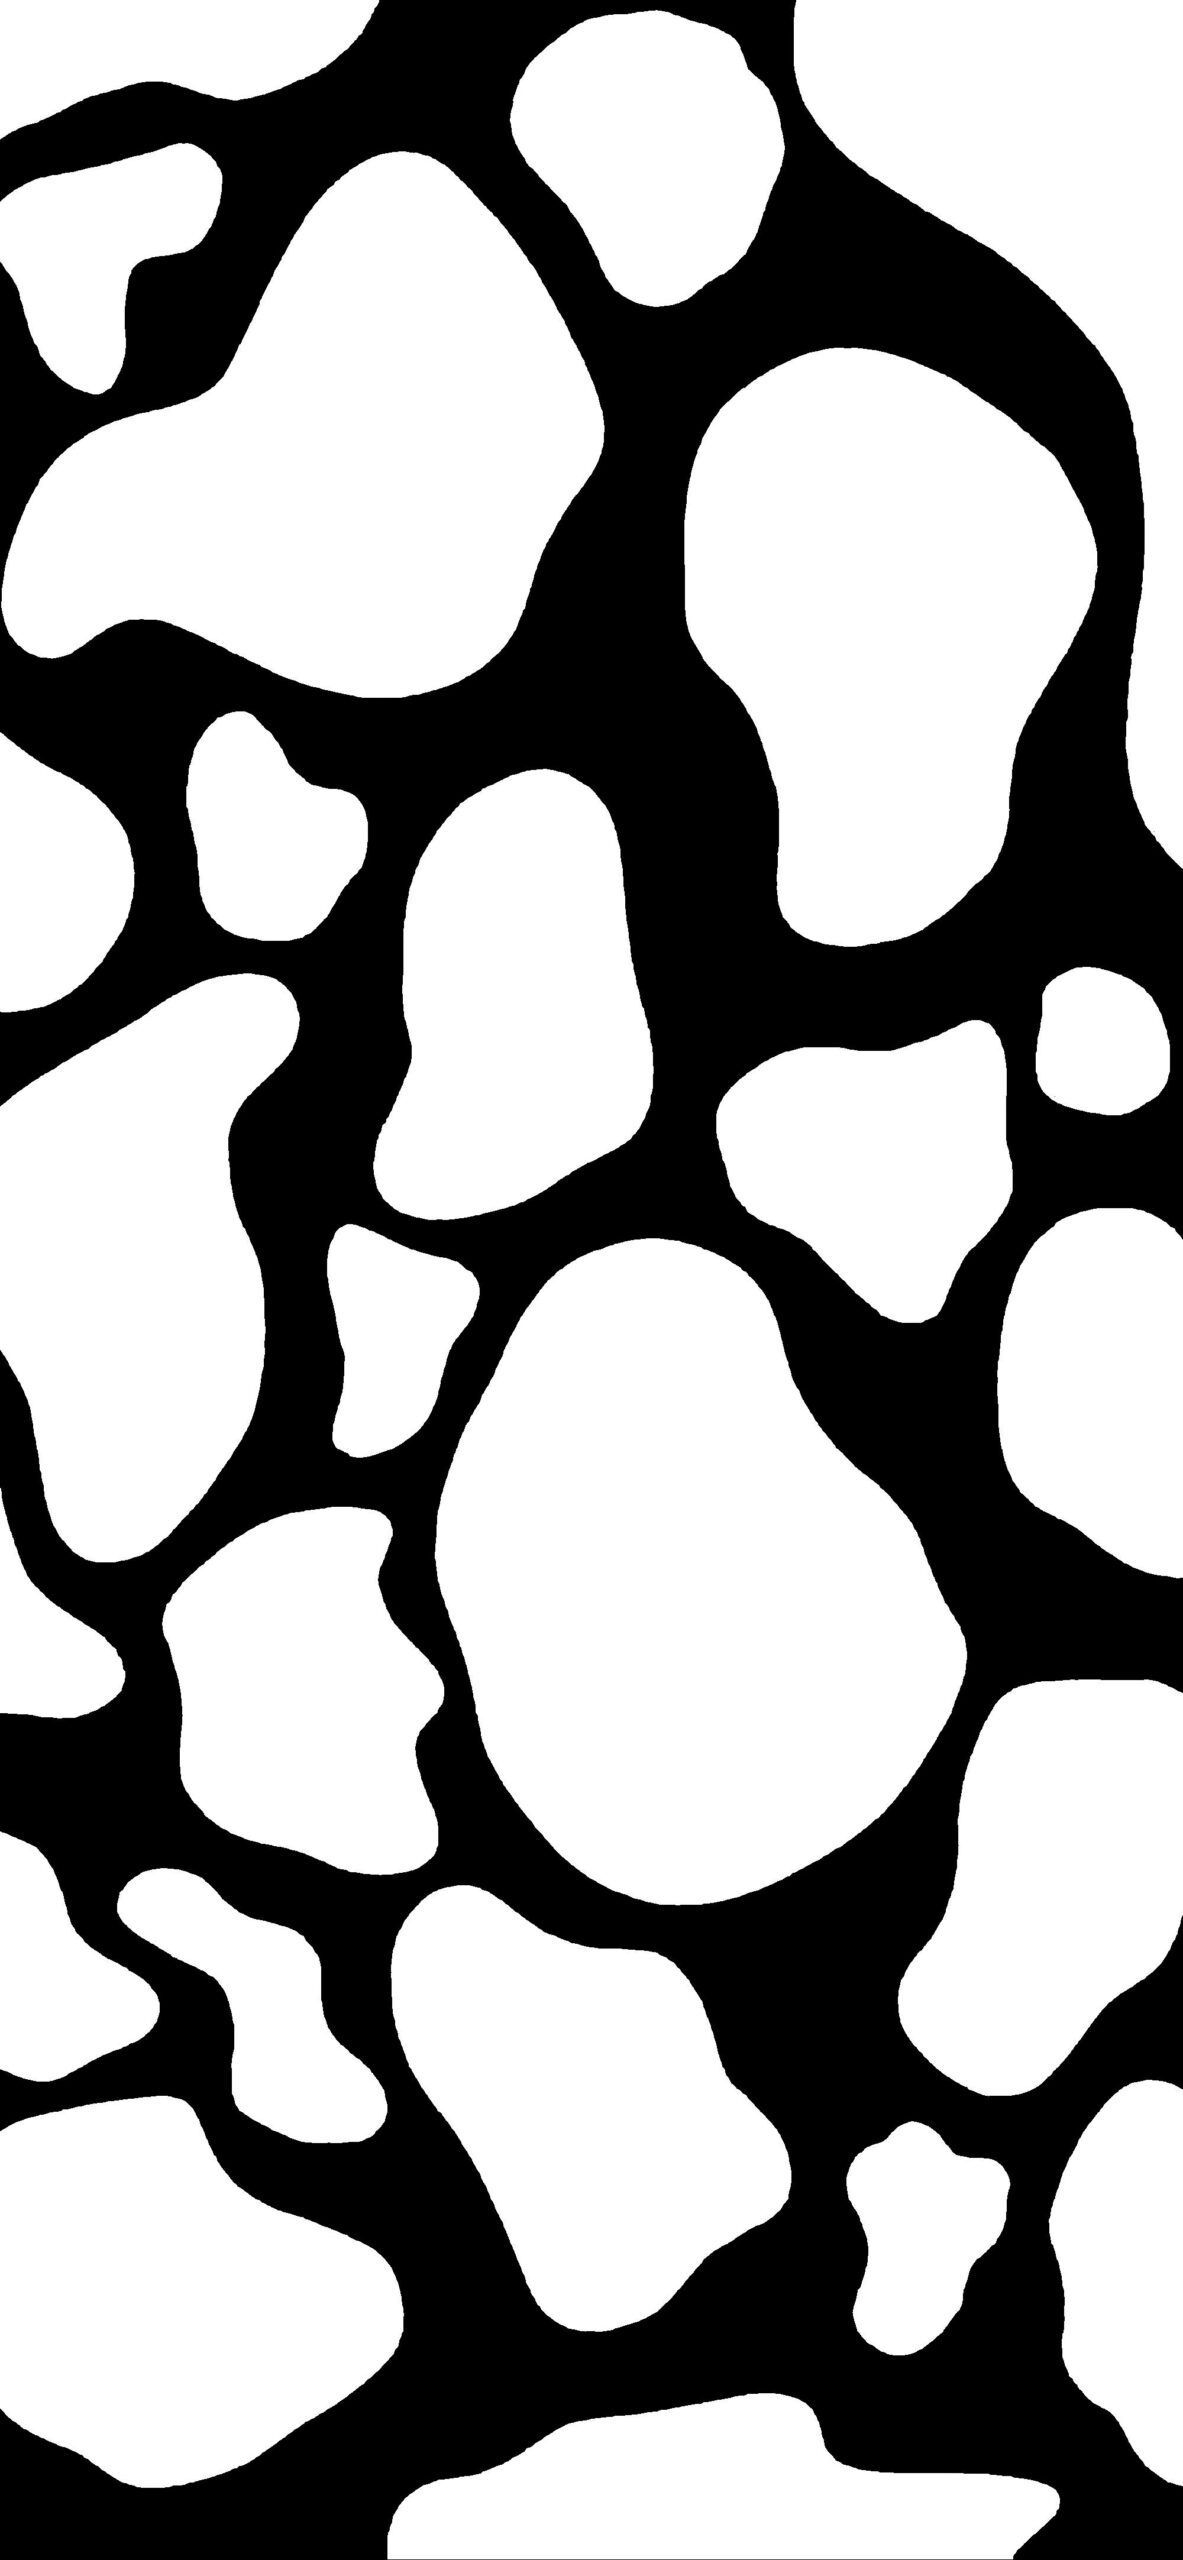 A black and white drawing of rocks - Cow